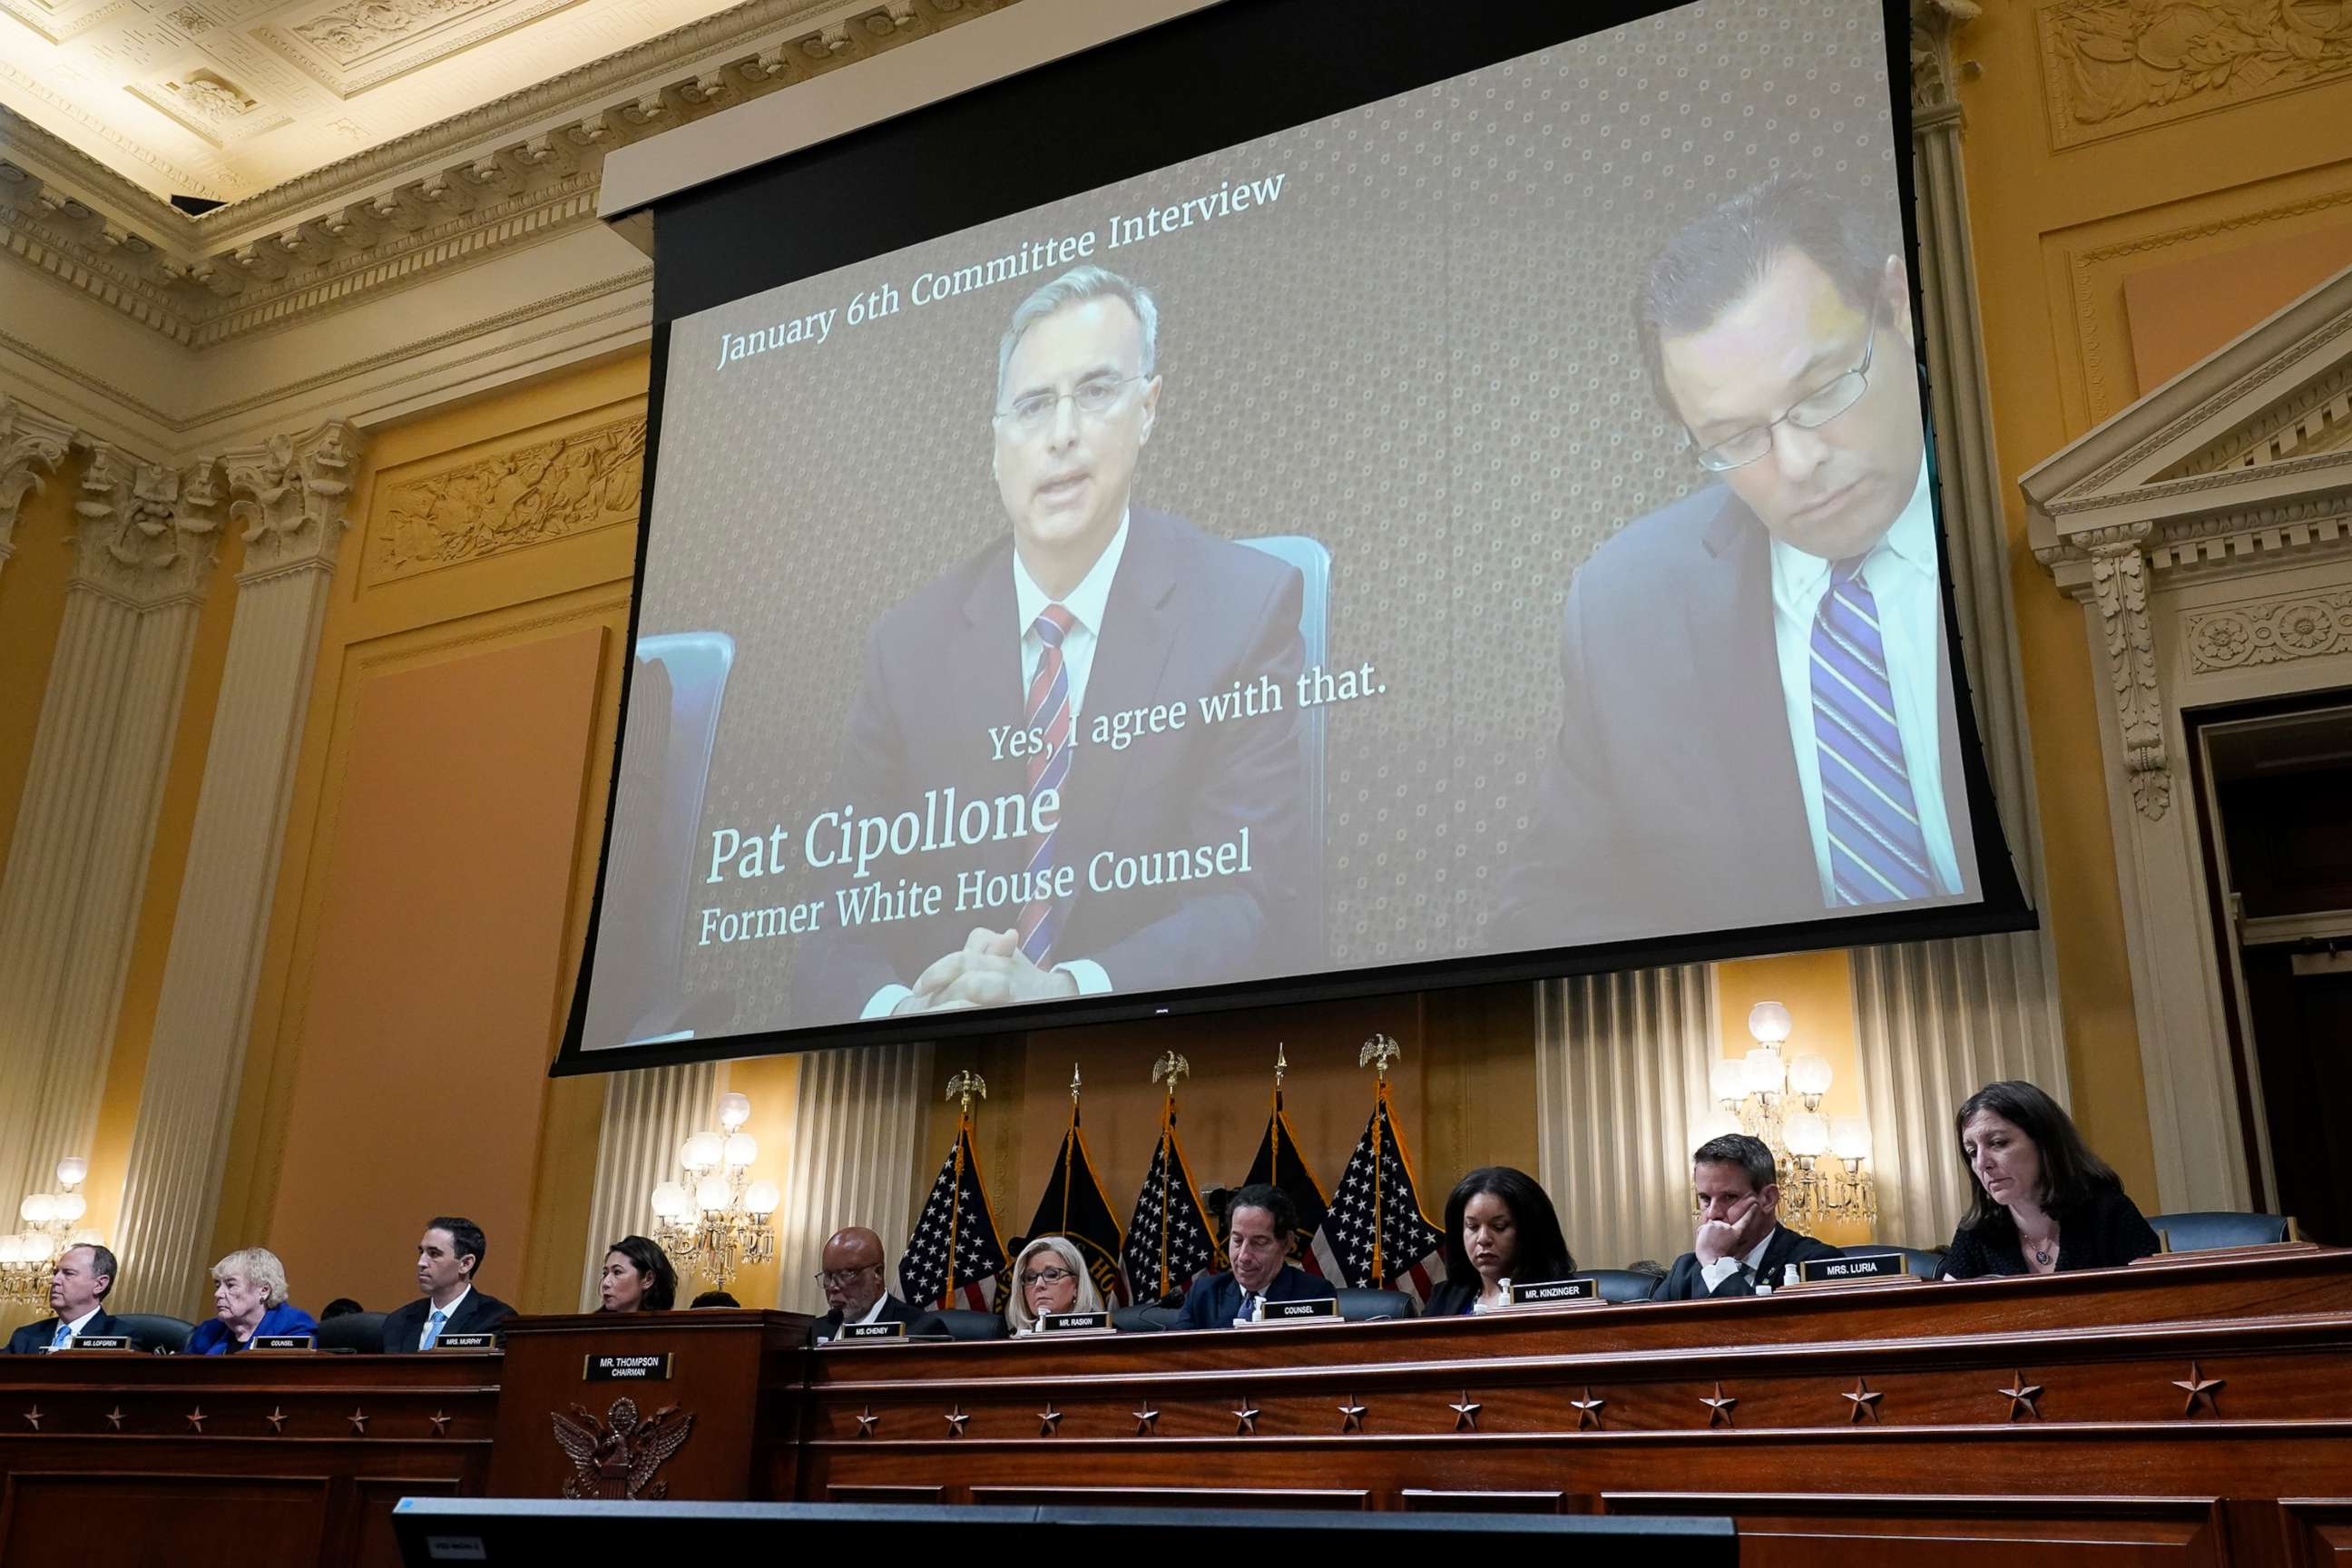 PHOTO: A video showing Pat Cipollone, the former White House counsel, speaking during an interview with the Jan. 6 Committee during a hearing at the Capitol in Washington, July 12, 2022.